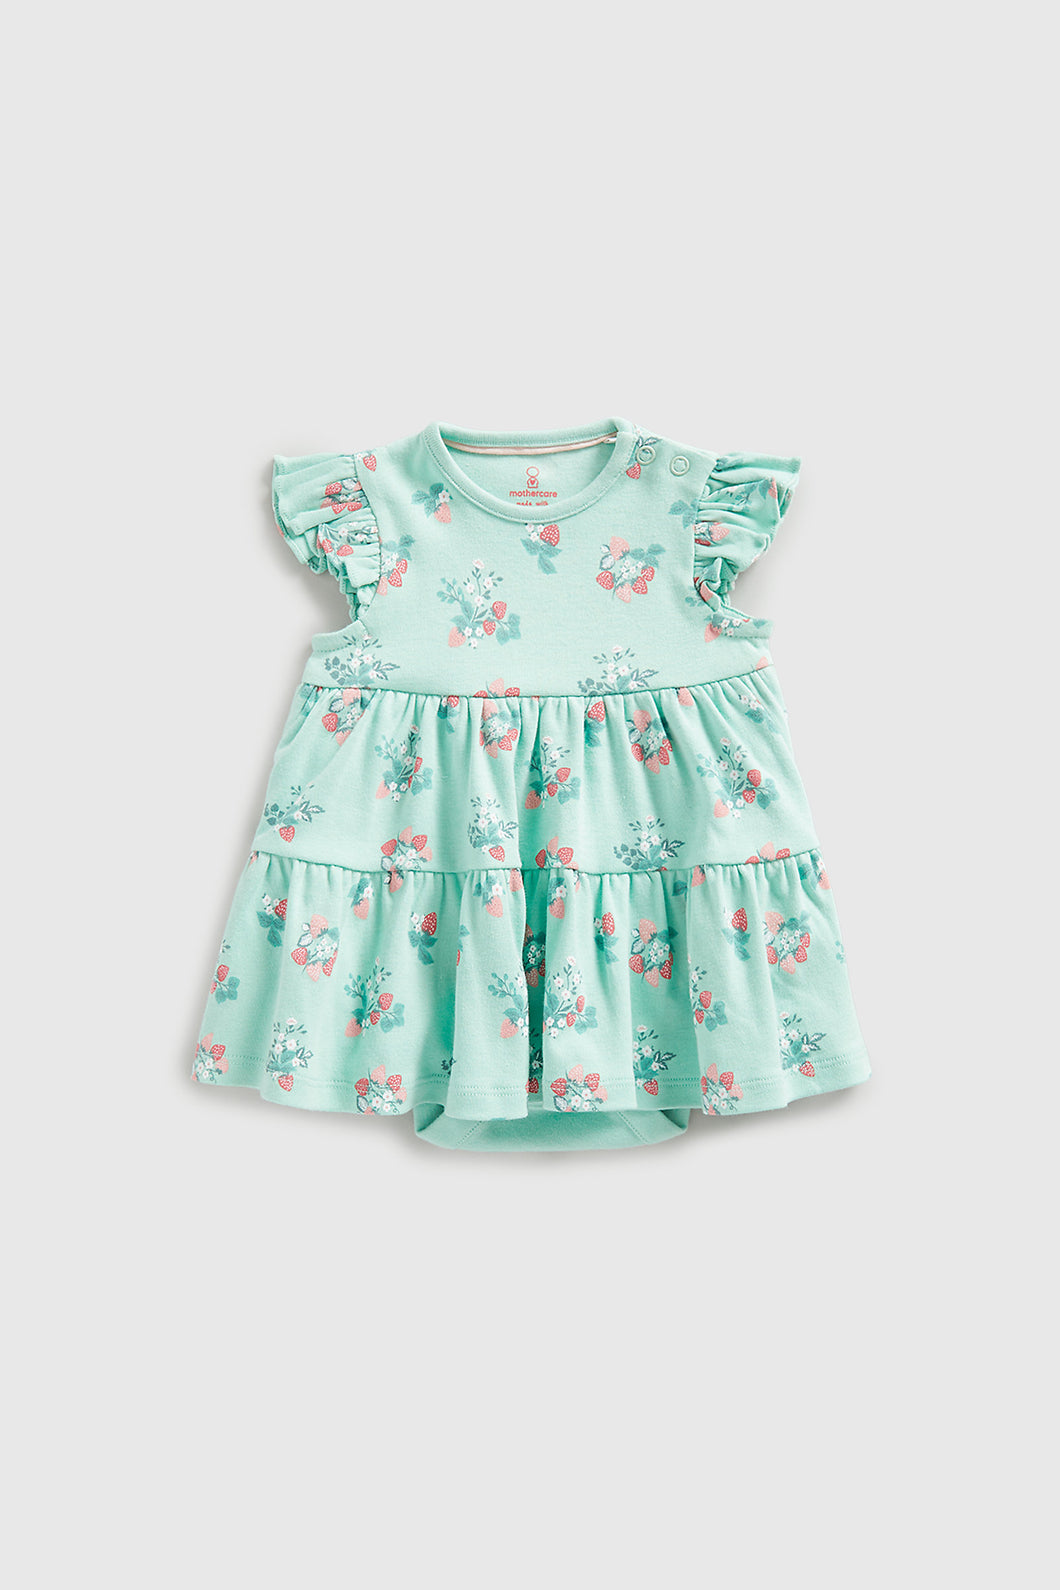 Mothercare Green Floral Romper Dress